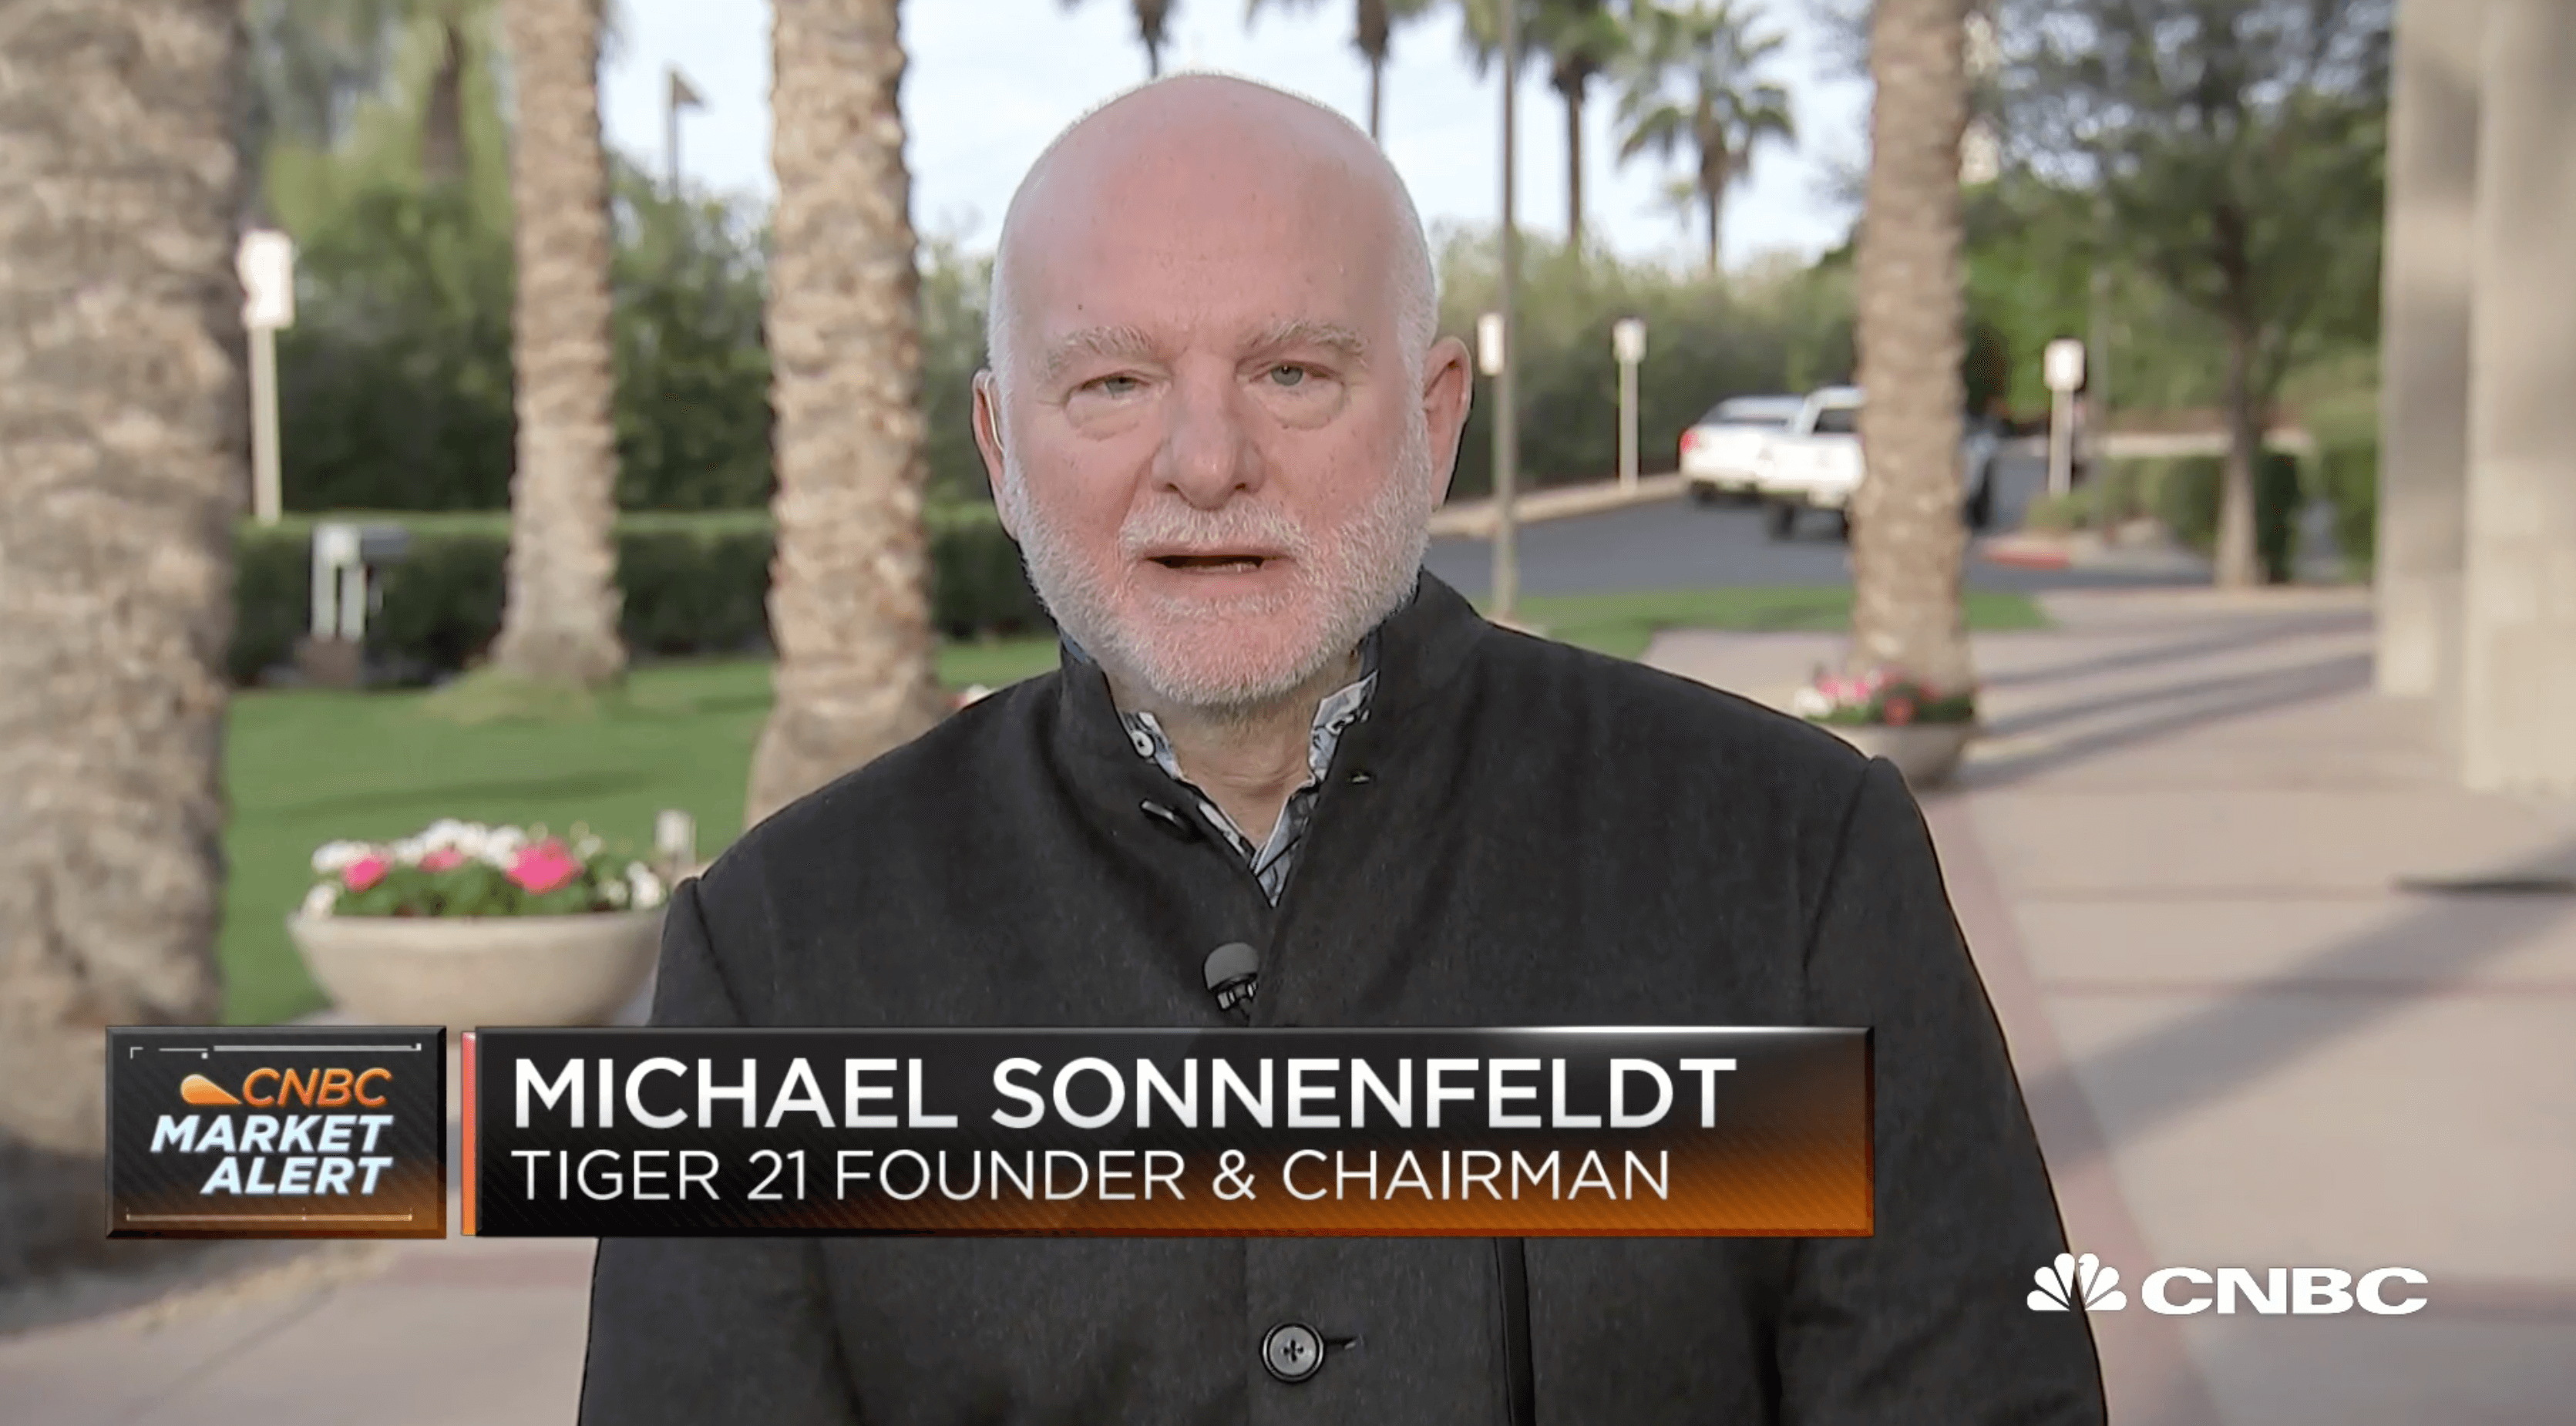 TIGER 21 ANNUAL CONFERENCE: CNBC INTERVIEW WITH TIGER 21 FOUNDER MICHAEL SONNENFELDT ON LATEST MEMBER TRENDS